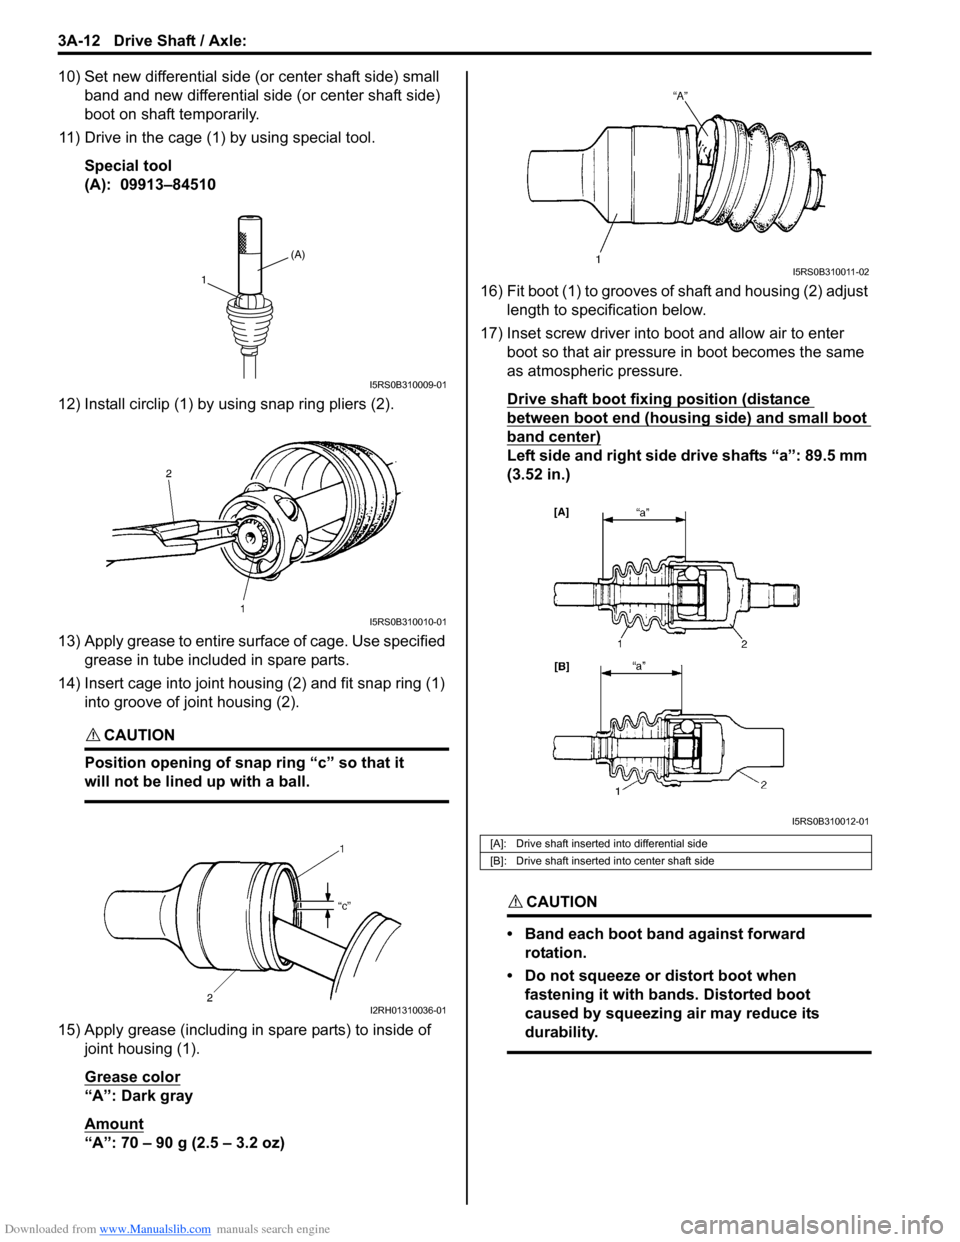 SUZUKI SWIFT 2008 2.G Service User Guide Downloaded from www.Manualslib.com manuals search engine 3A-12 Drive Shaft / Axle: 
10) Set new differential side (or center shaft side) small band and new differential side (or center shaft side) 
bo